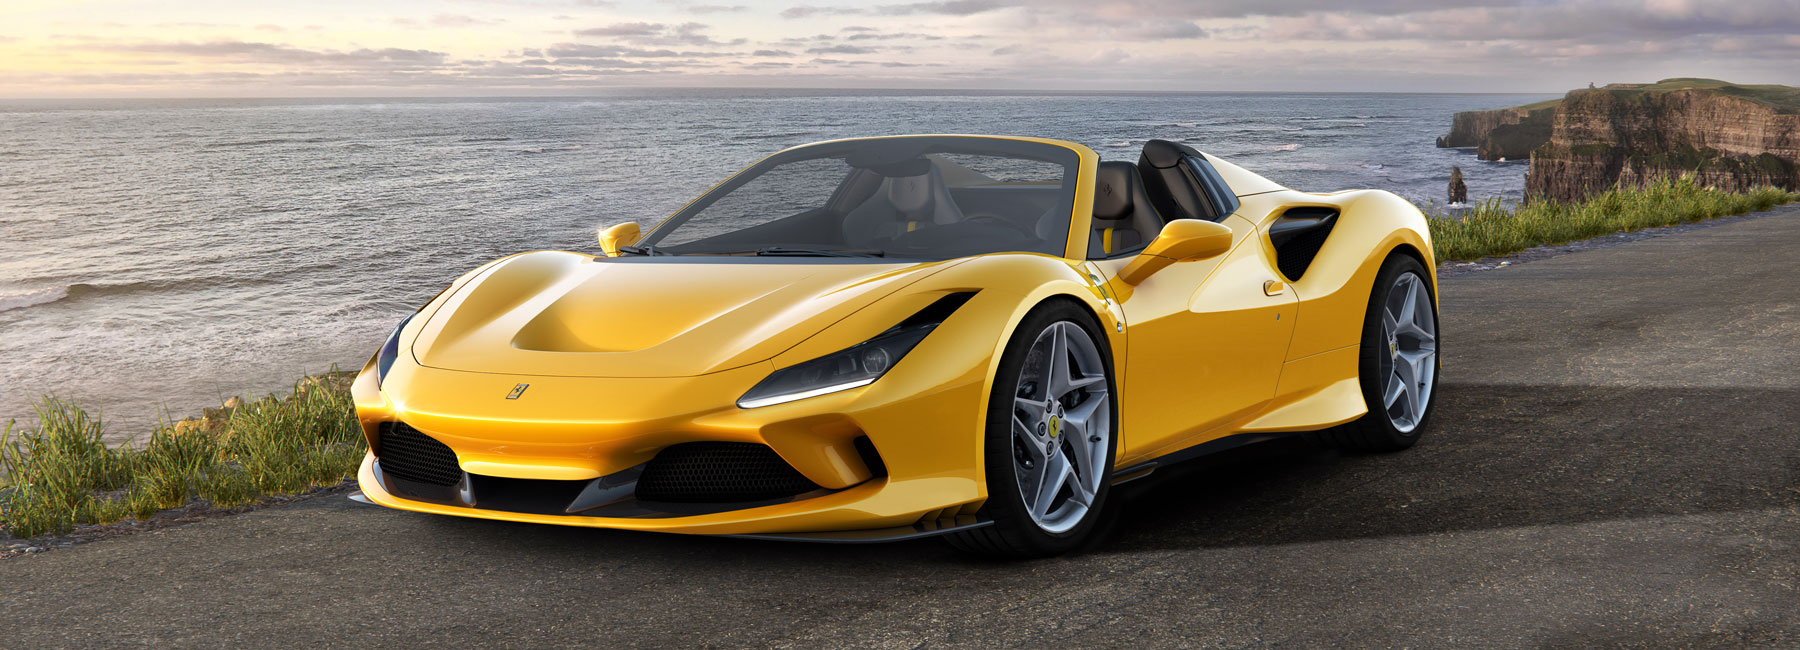 Ferrari Reveals 2020 F8 Spider With More Power And Less Weight